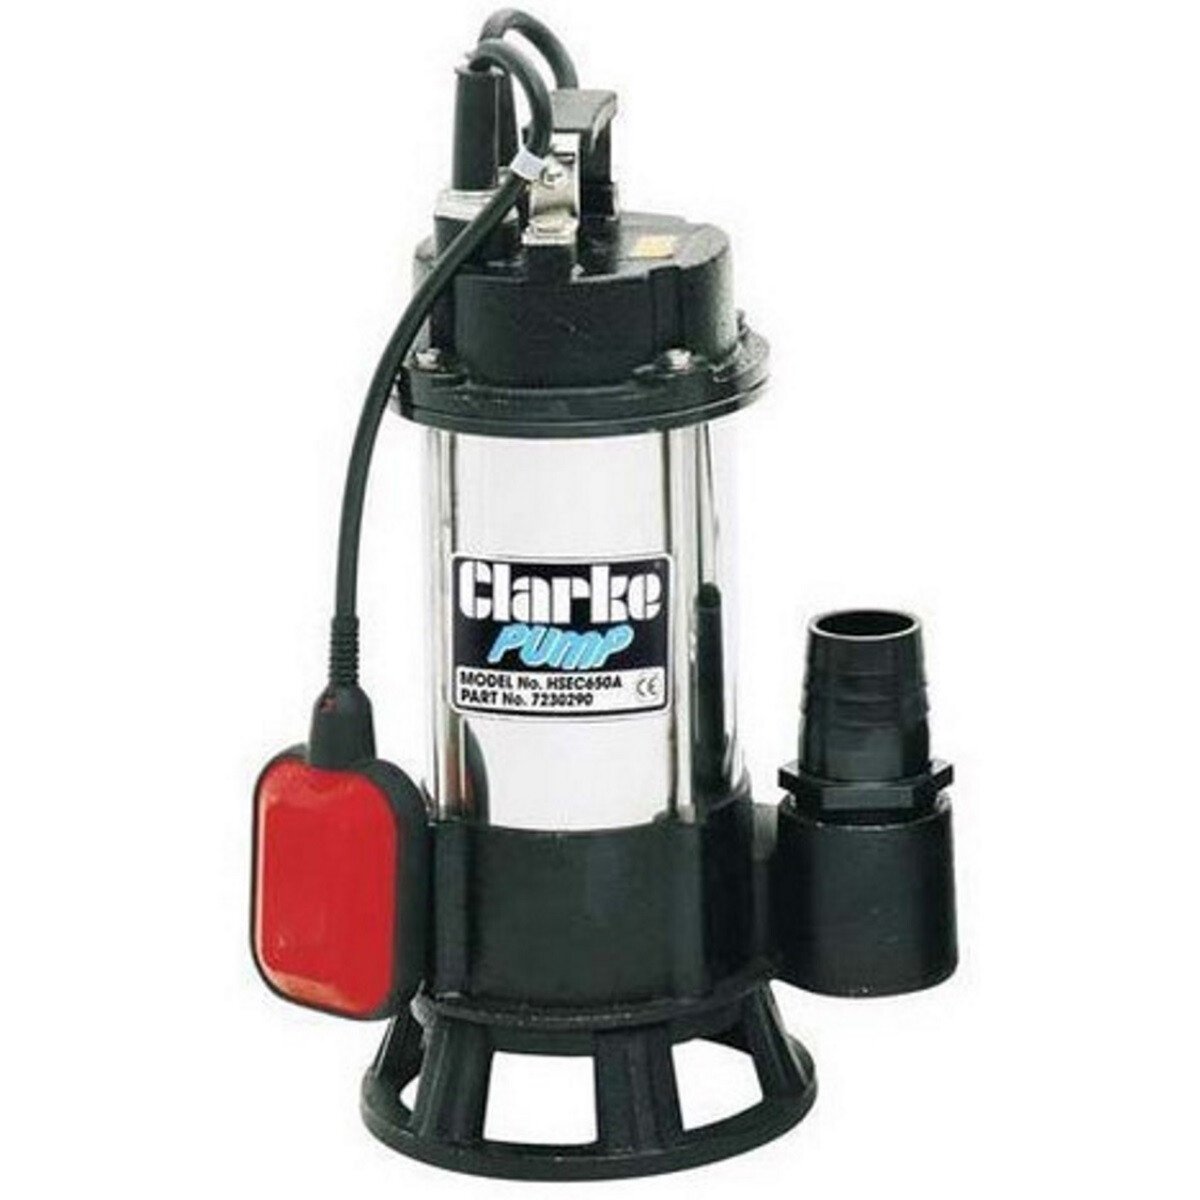 Clarke 7230290  HSEC650A 2" Industrial Submersible Dirty Water Cutter Pump 230v